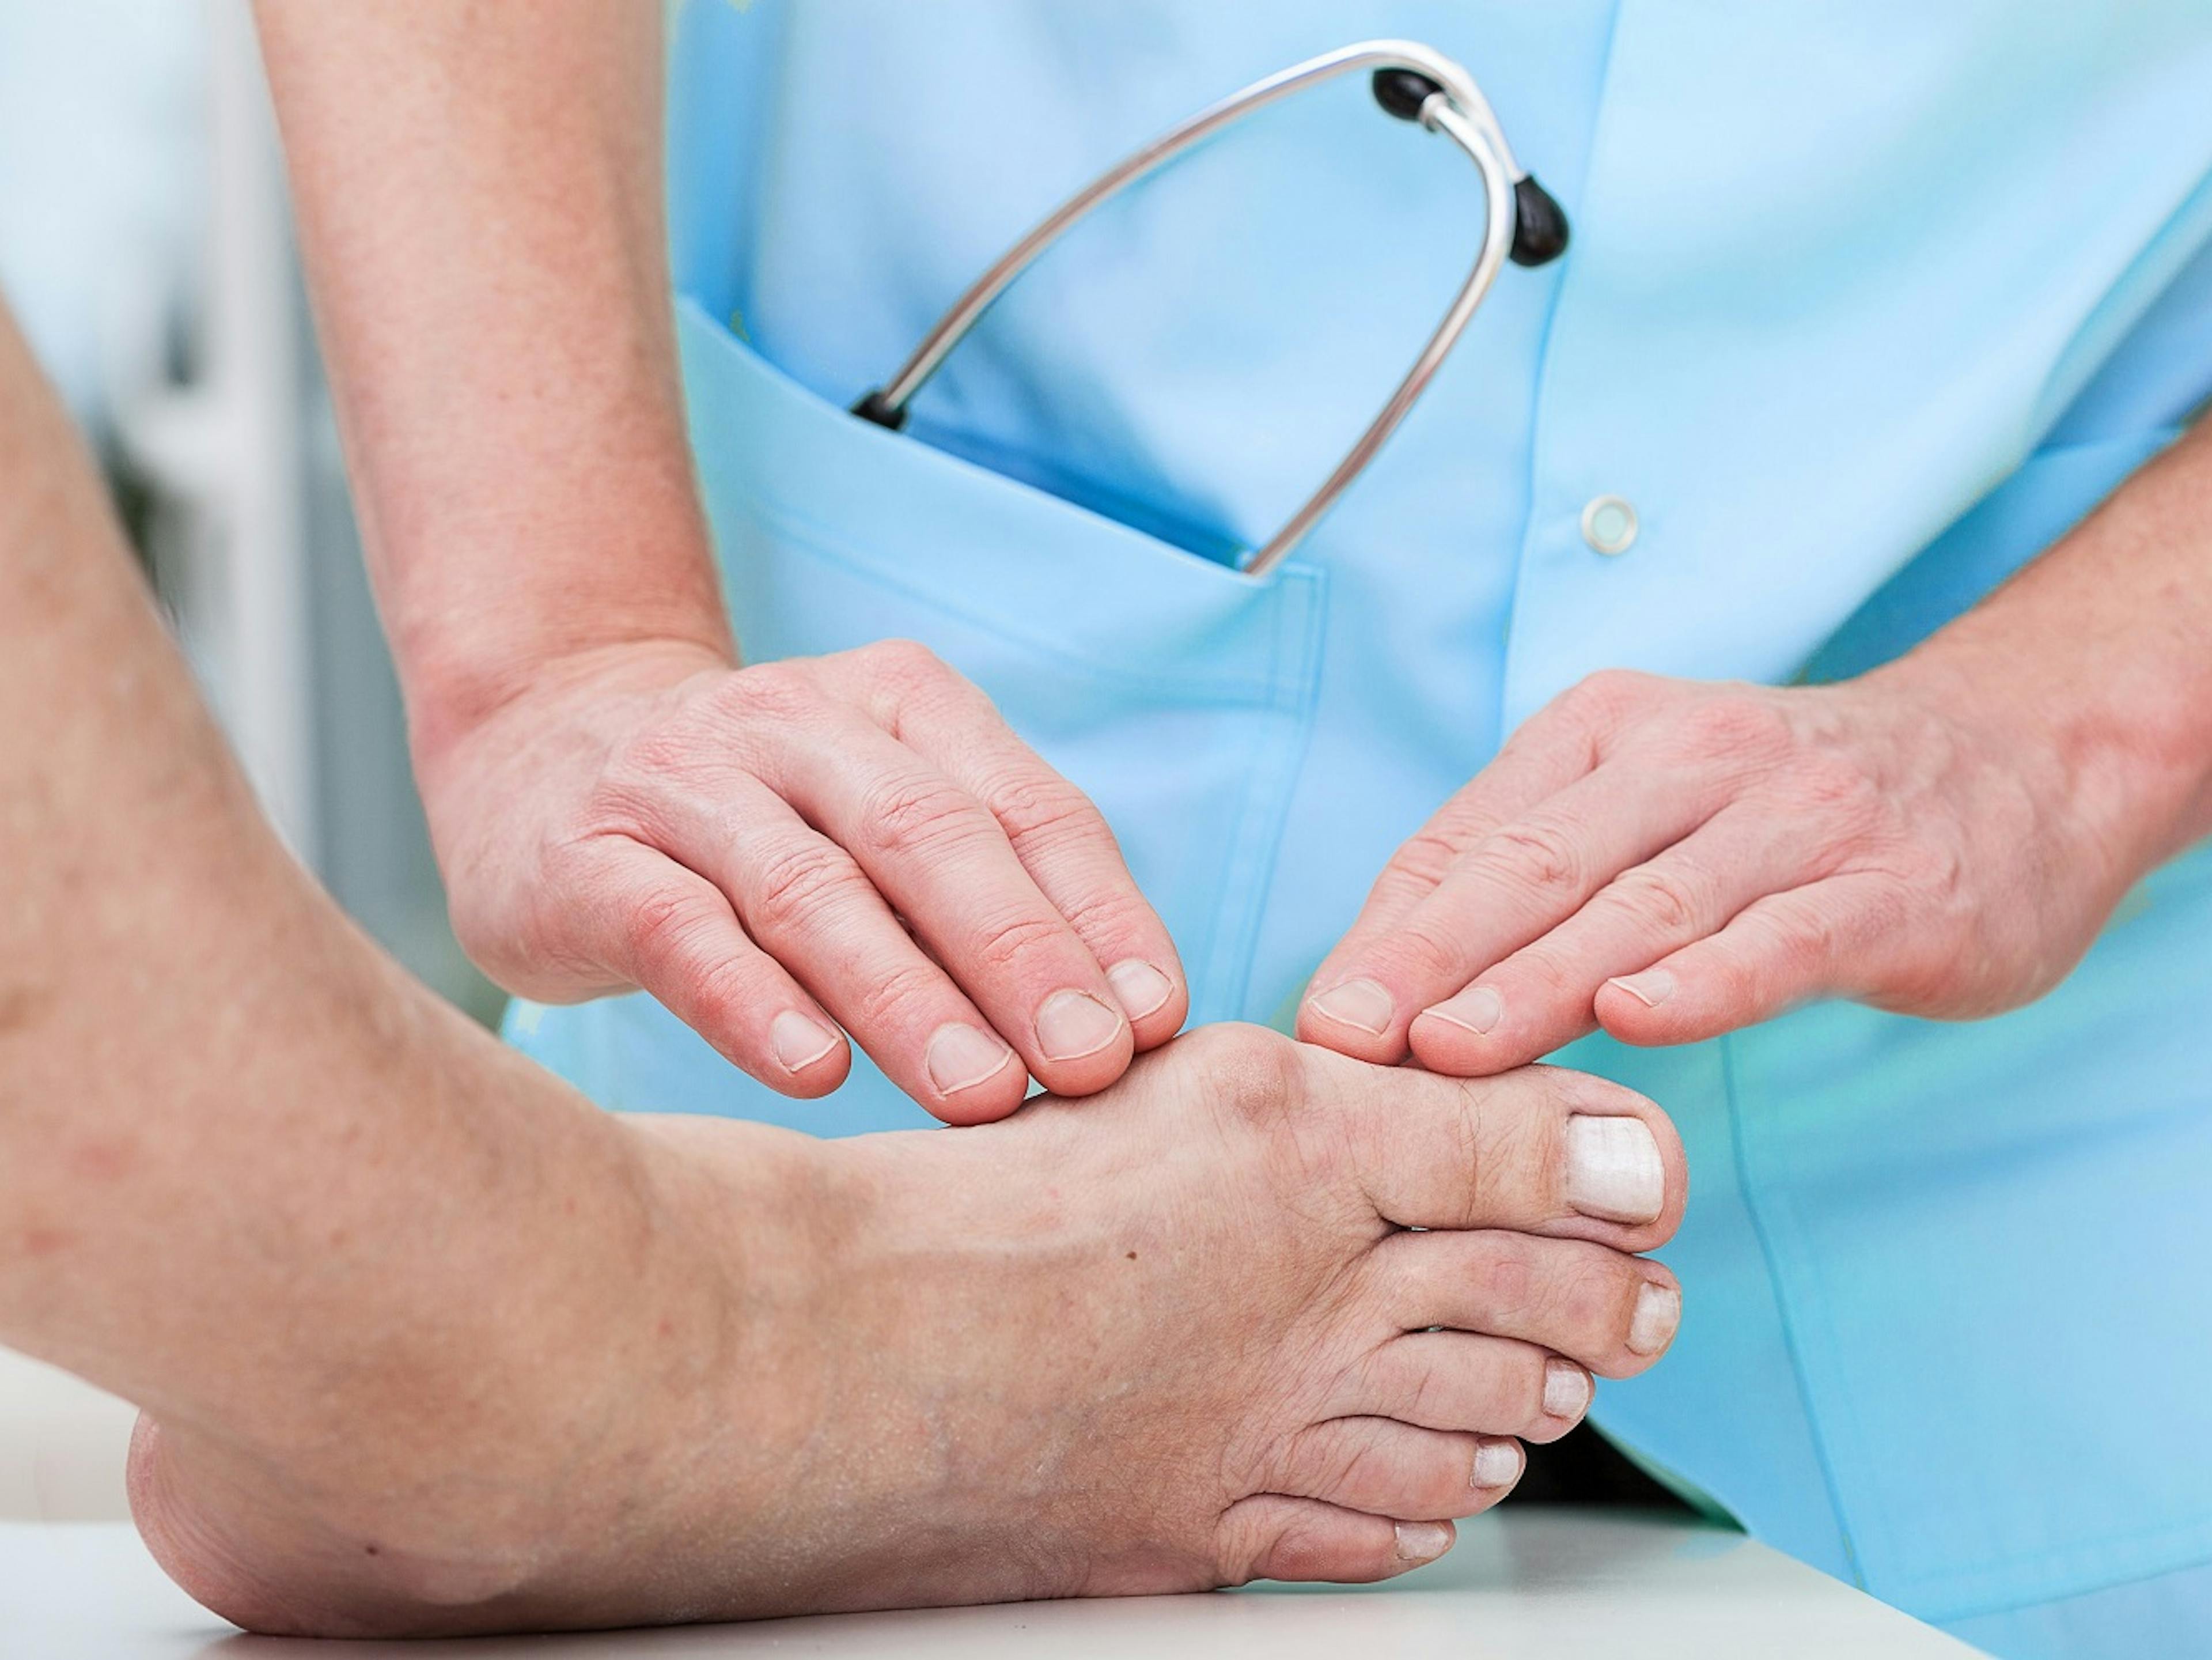 Does Medicare Cover Bunion Surgery?